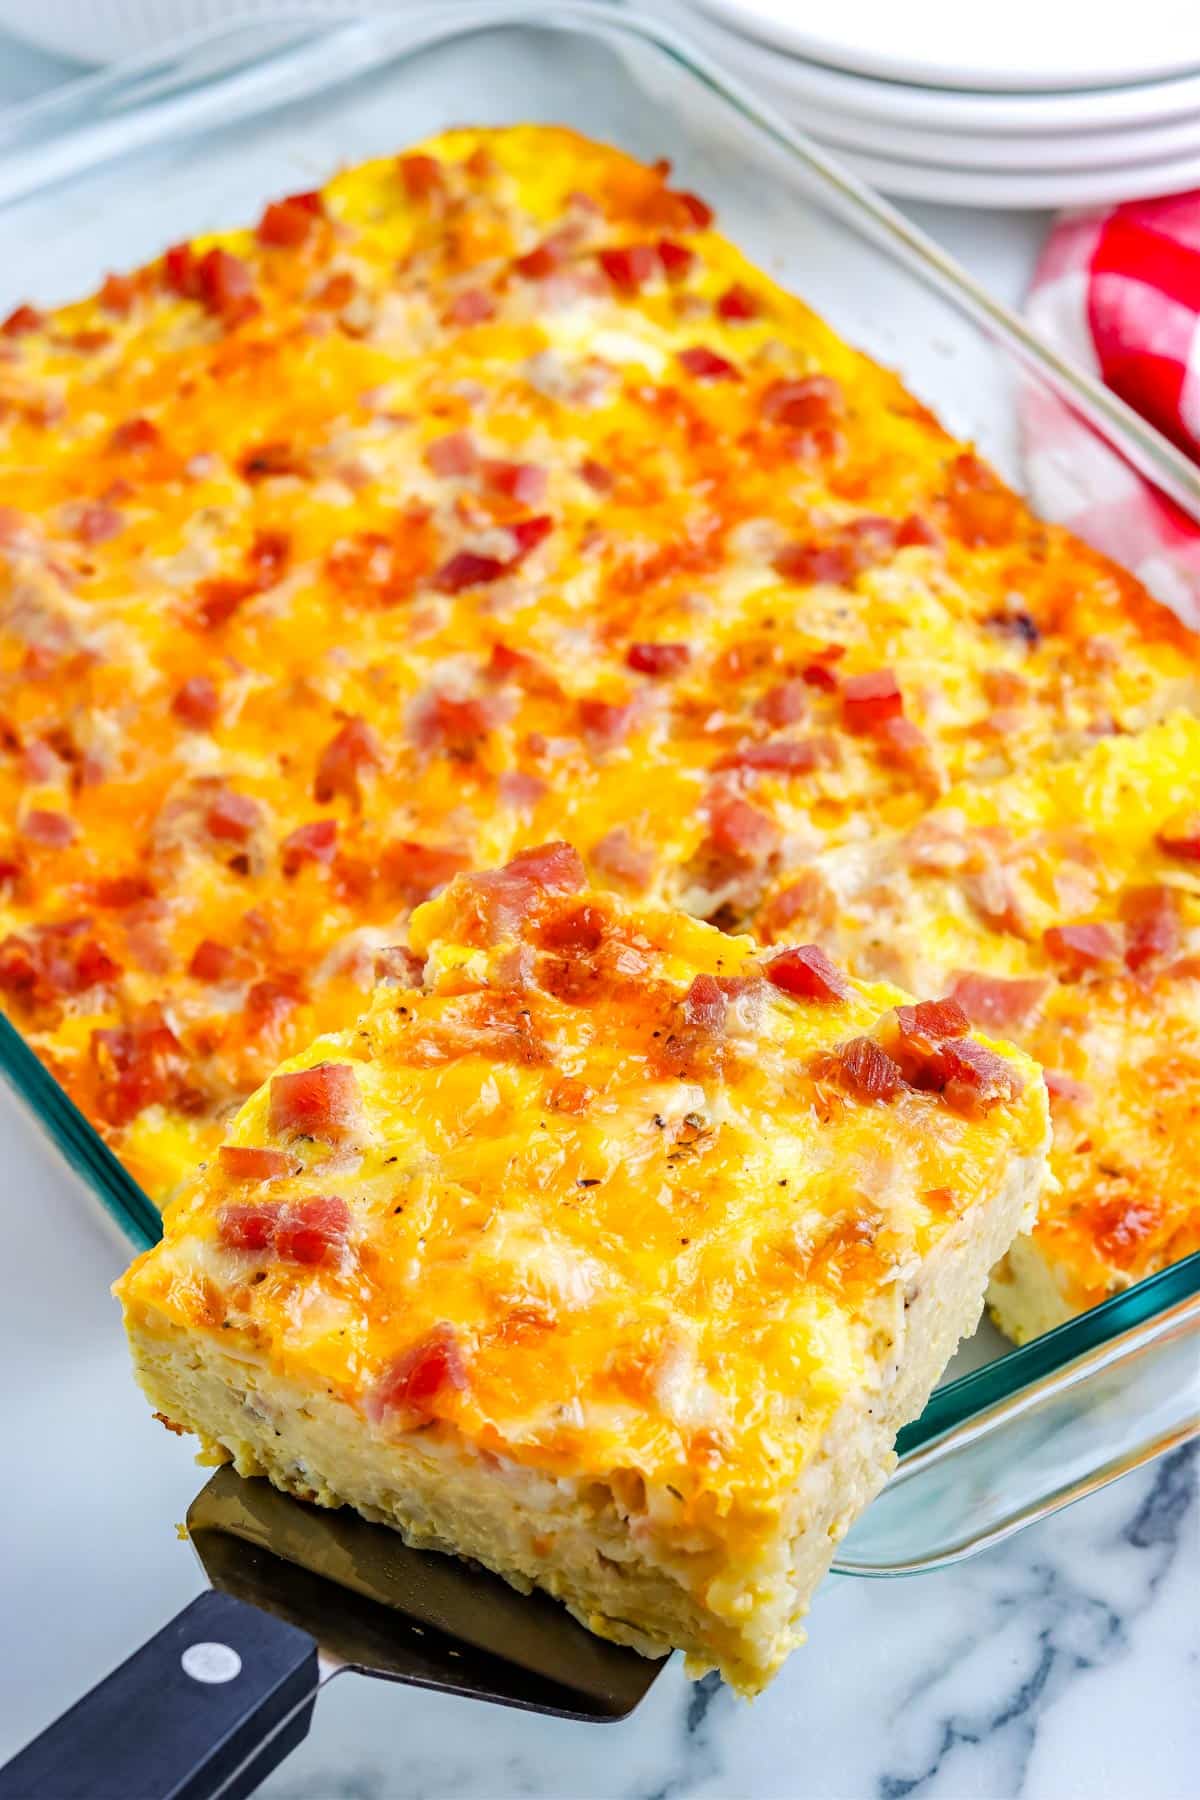 A piece of ham and cheese breakfast casserole lifted from the casserole dish.